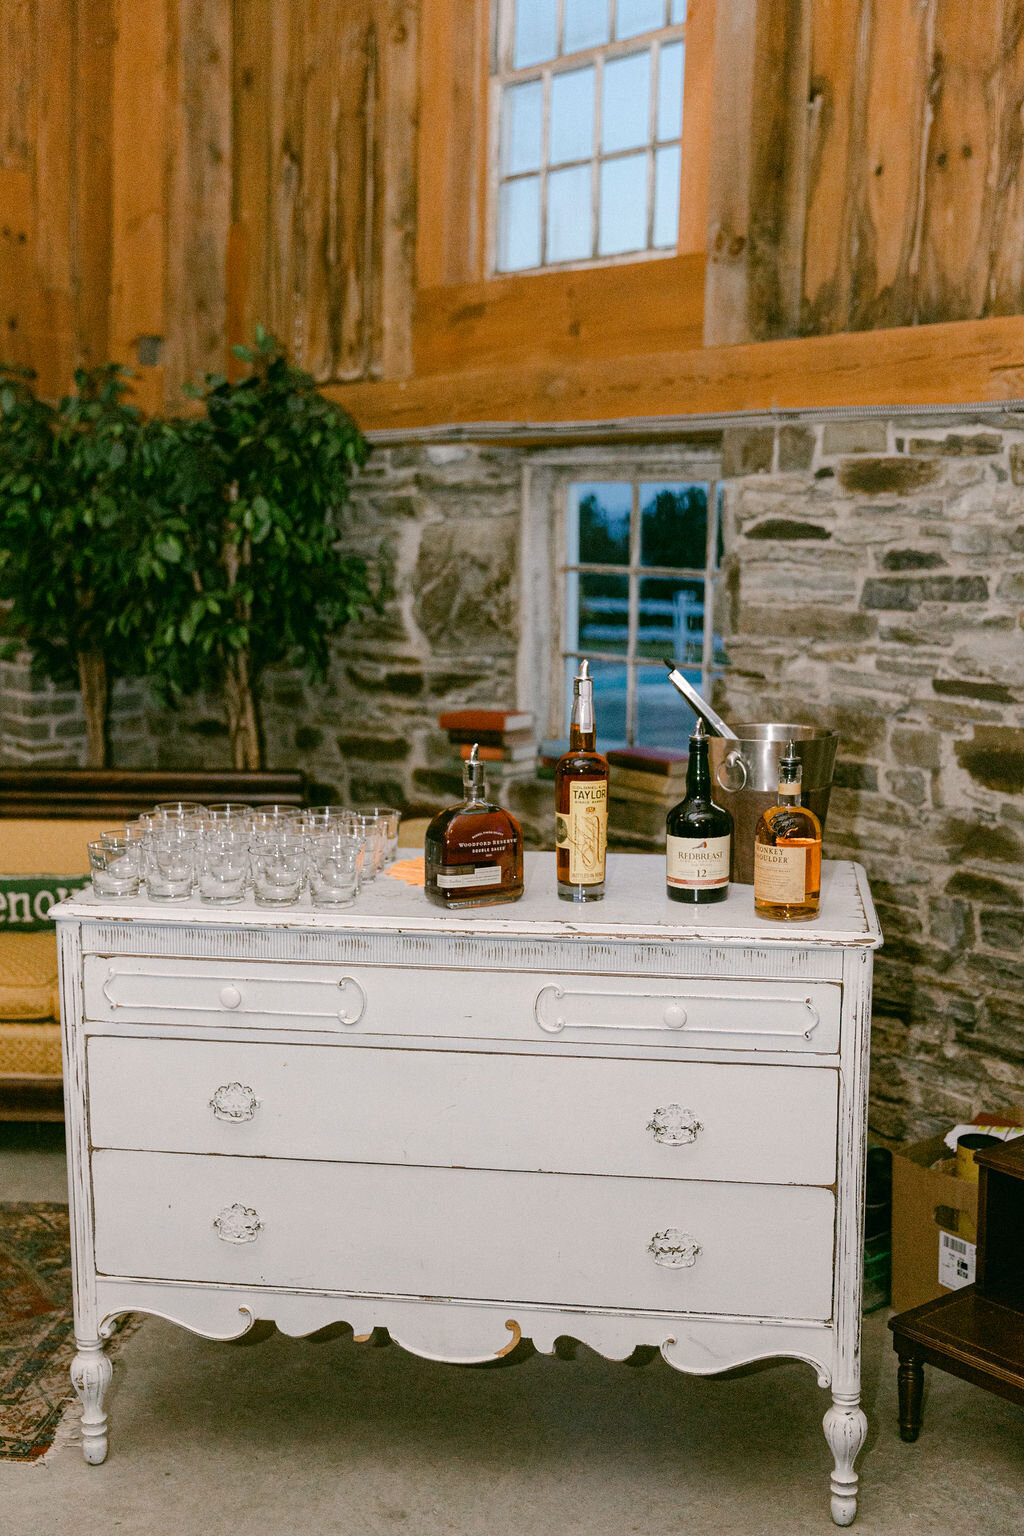 white dresser in stone barn holds a whiskey bar in Upstate